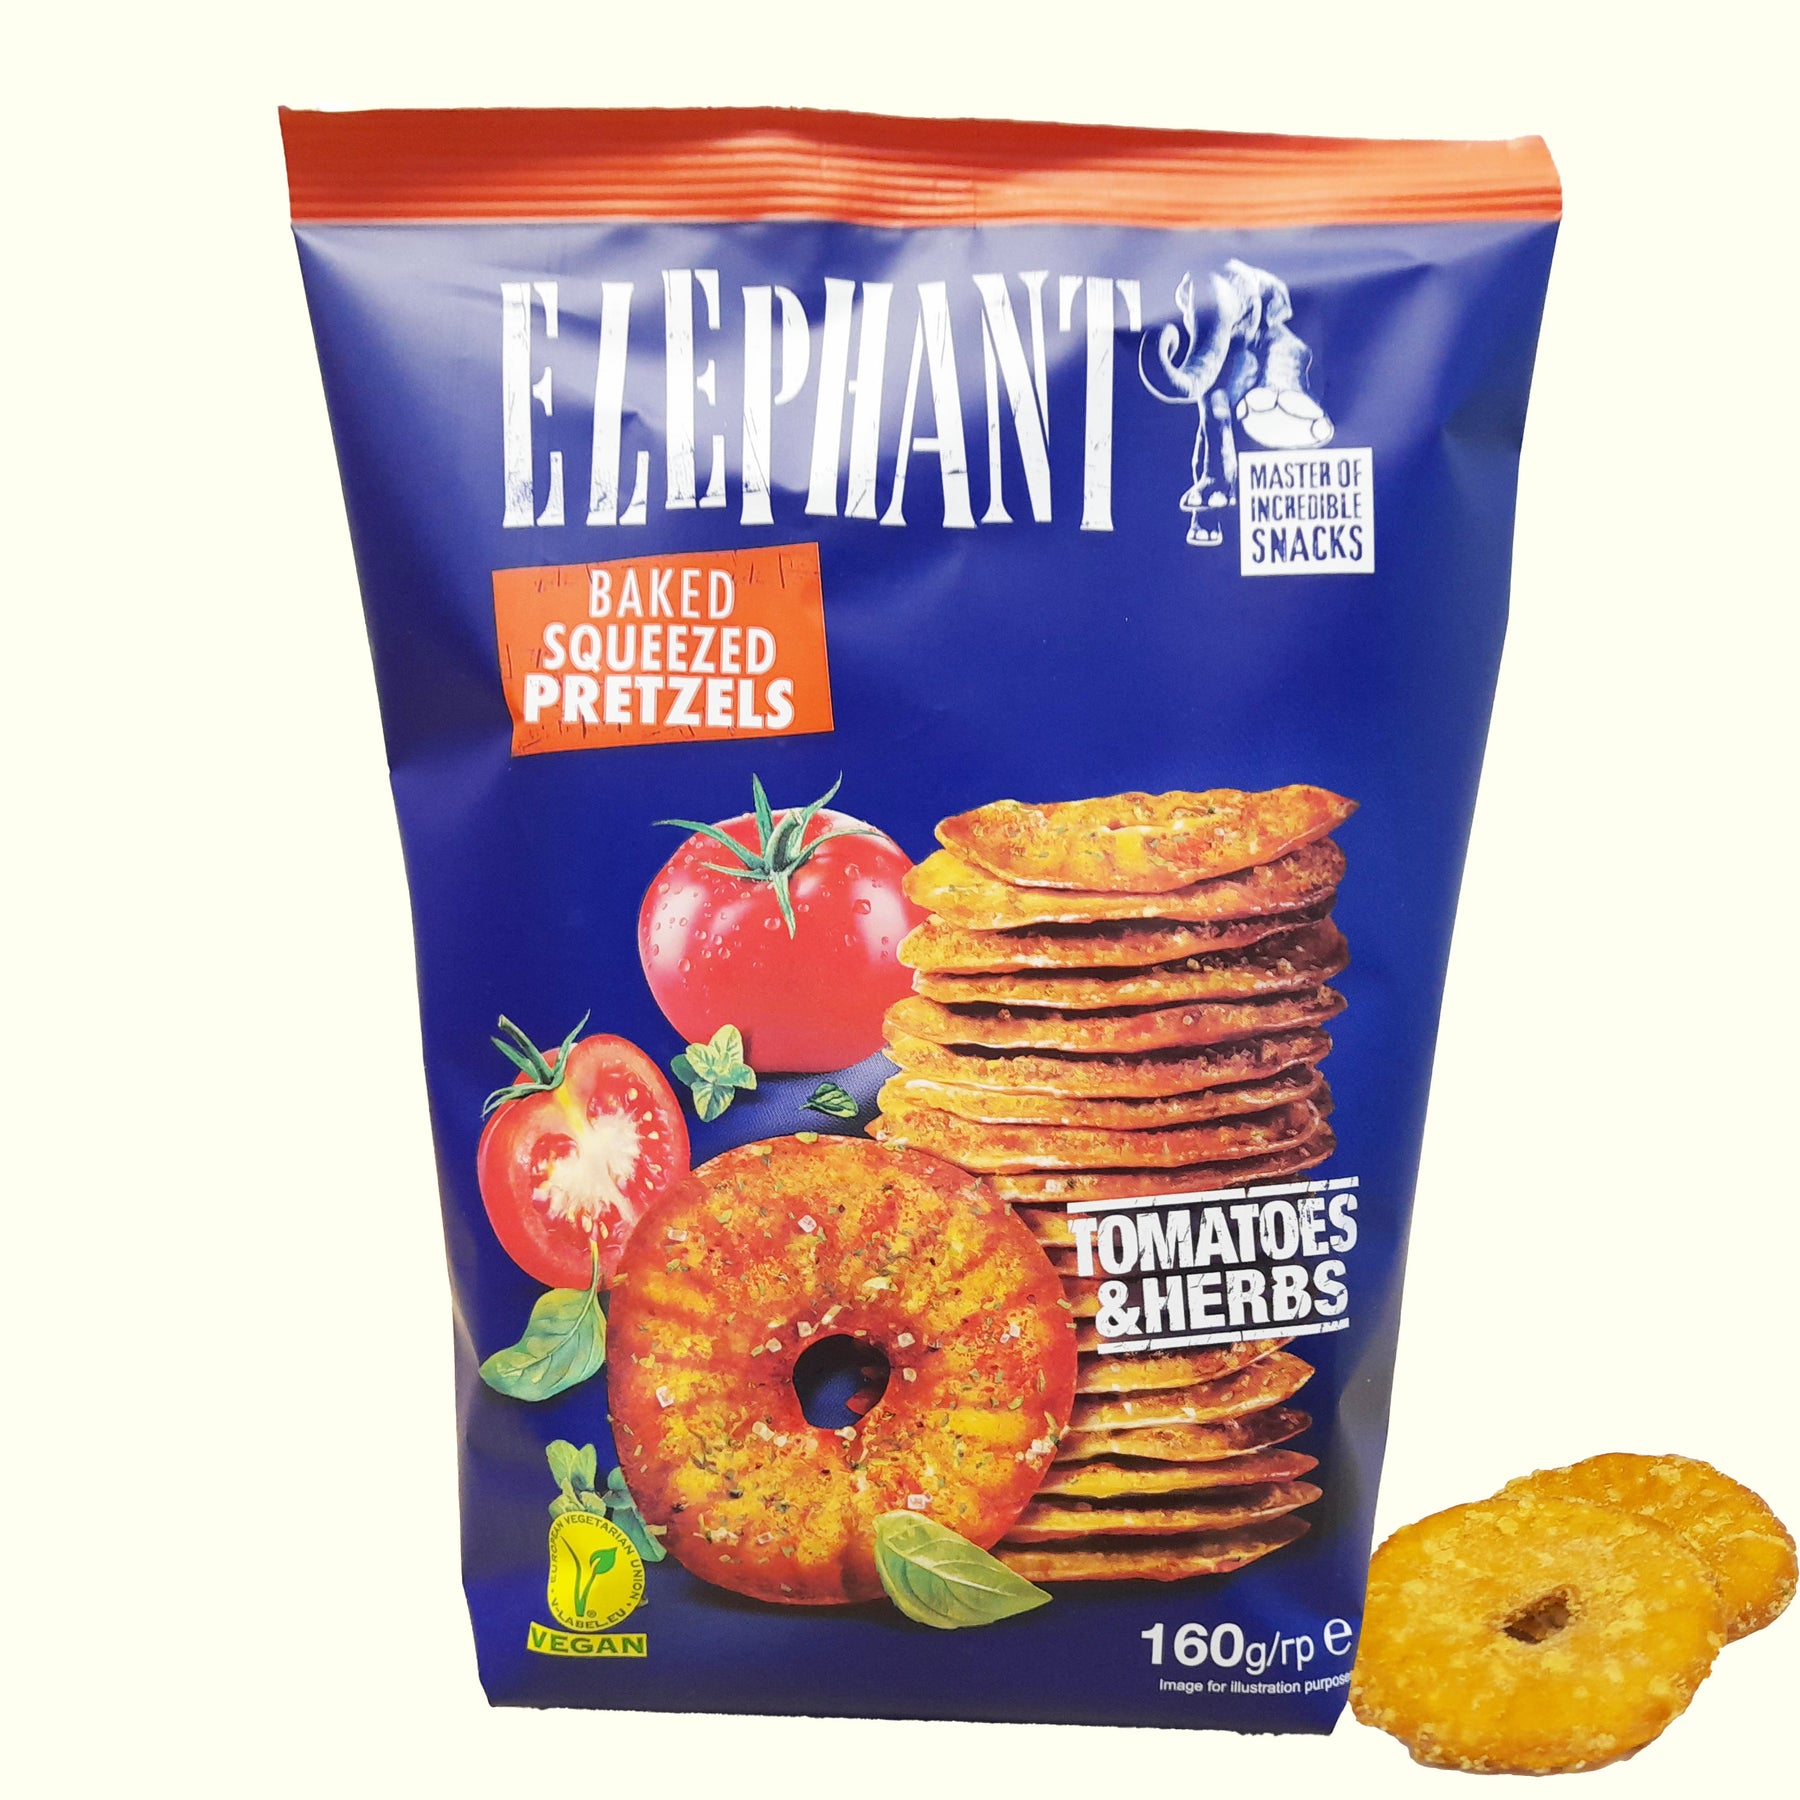 Elephant Baked Squeezed Pretzels Tomatoes & Herbs 160g